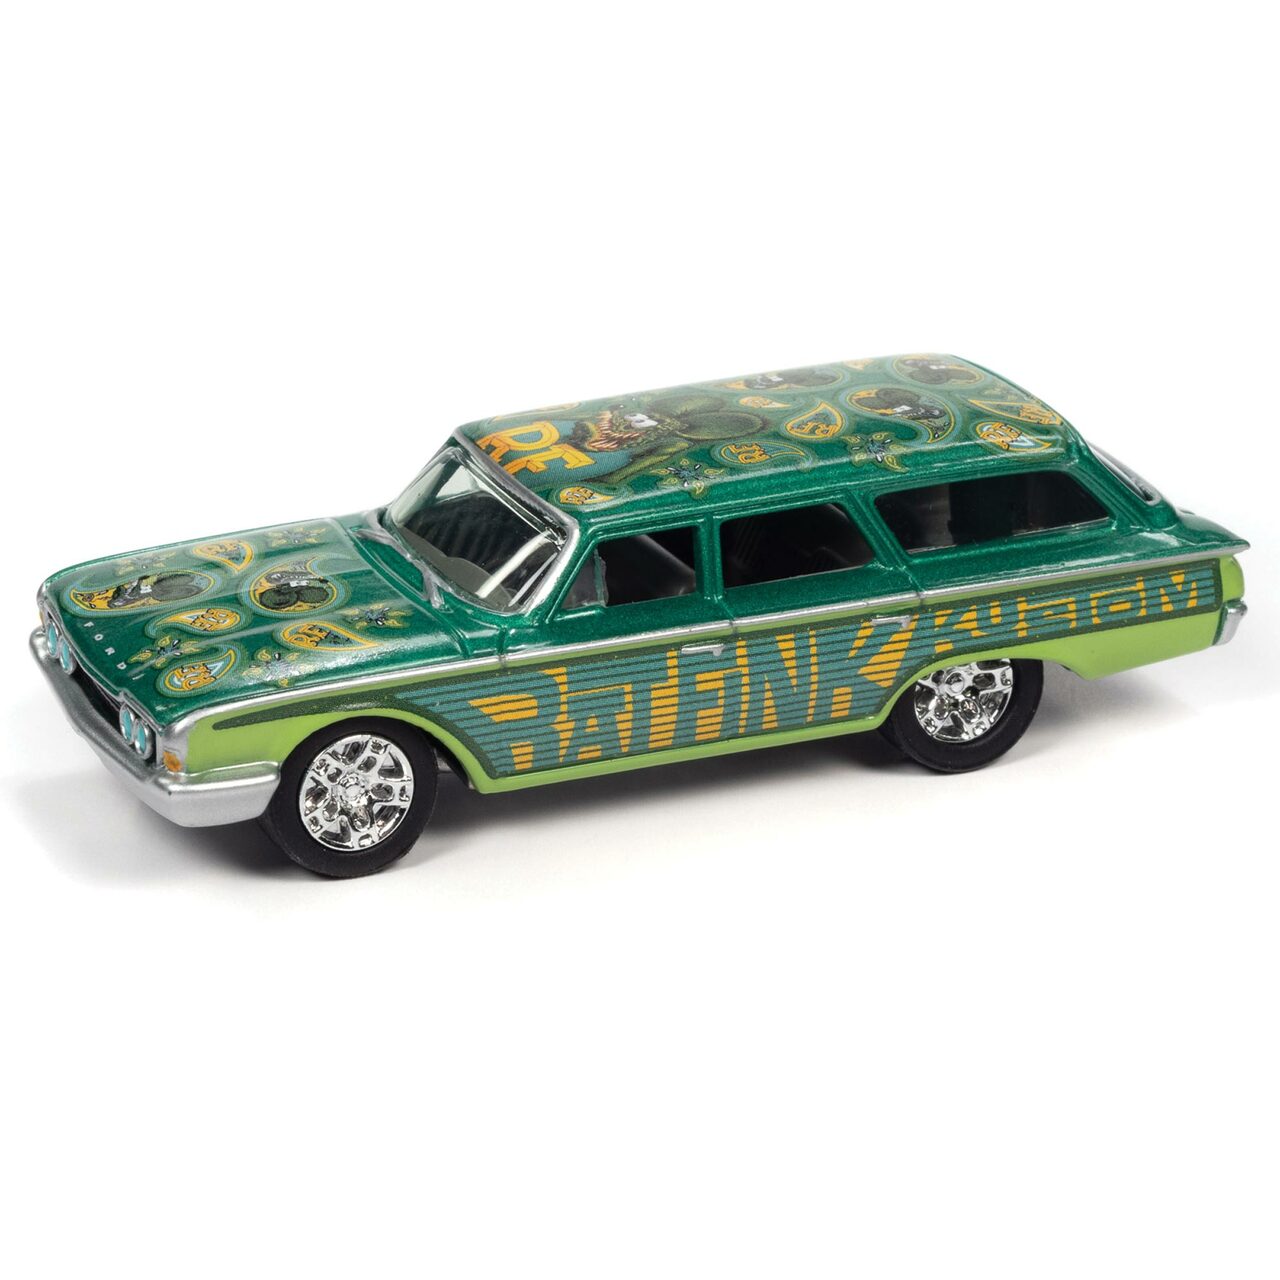 1960 Ford Rat Fink Country Squire (Green + Teal) -1:64 Scale Diecast Replica Model